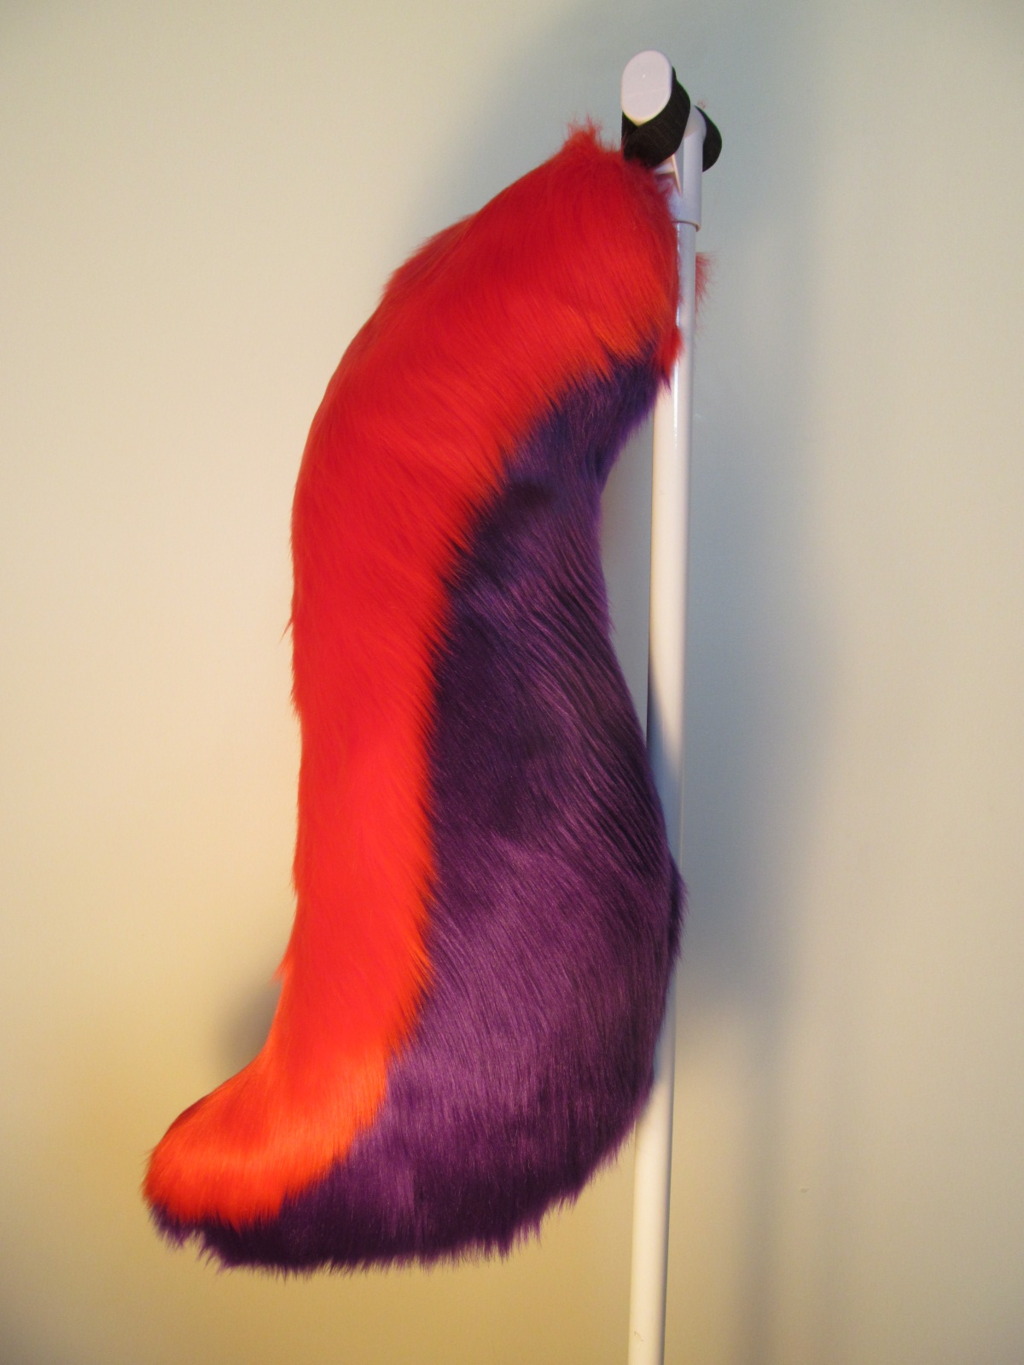 Most recent image: Red/Purple Tail Commission - Magnus